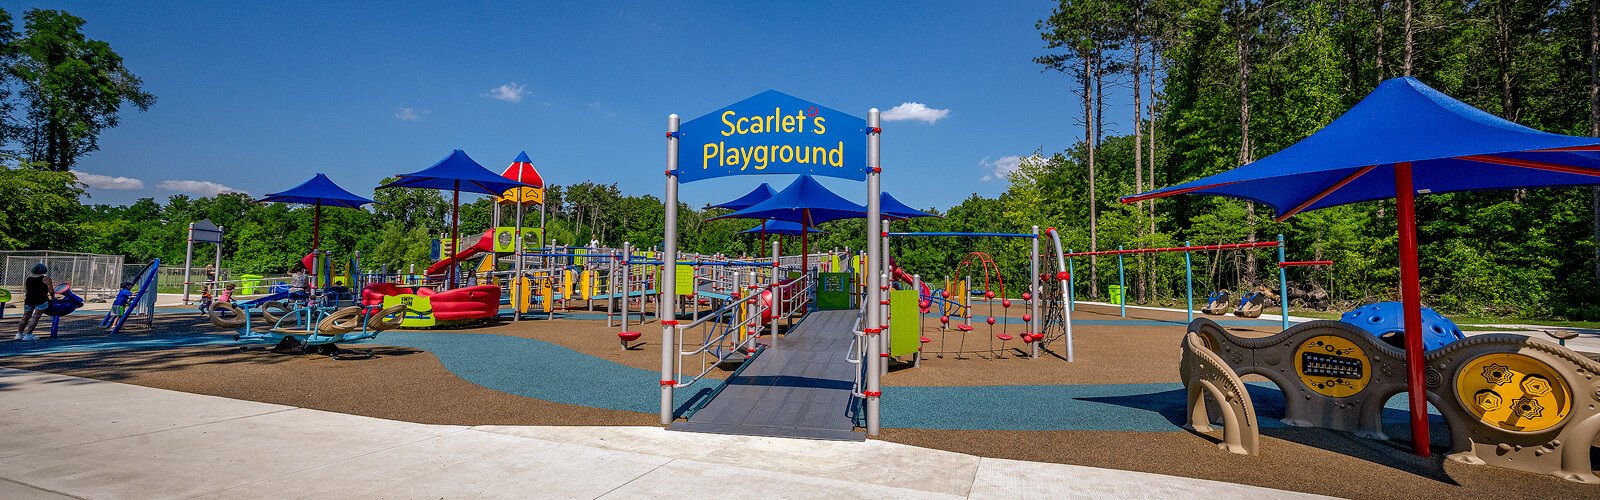 Scarlet’s Playground at Dodge Park #5 in Commerce Township